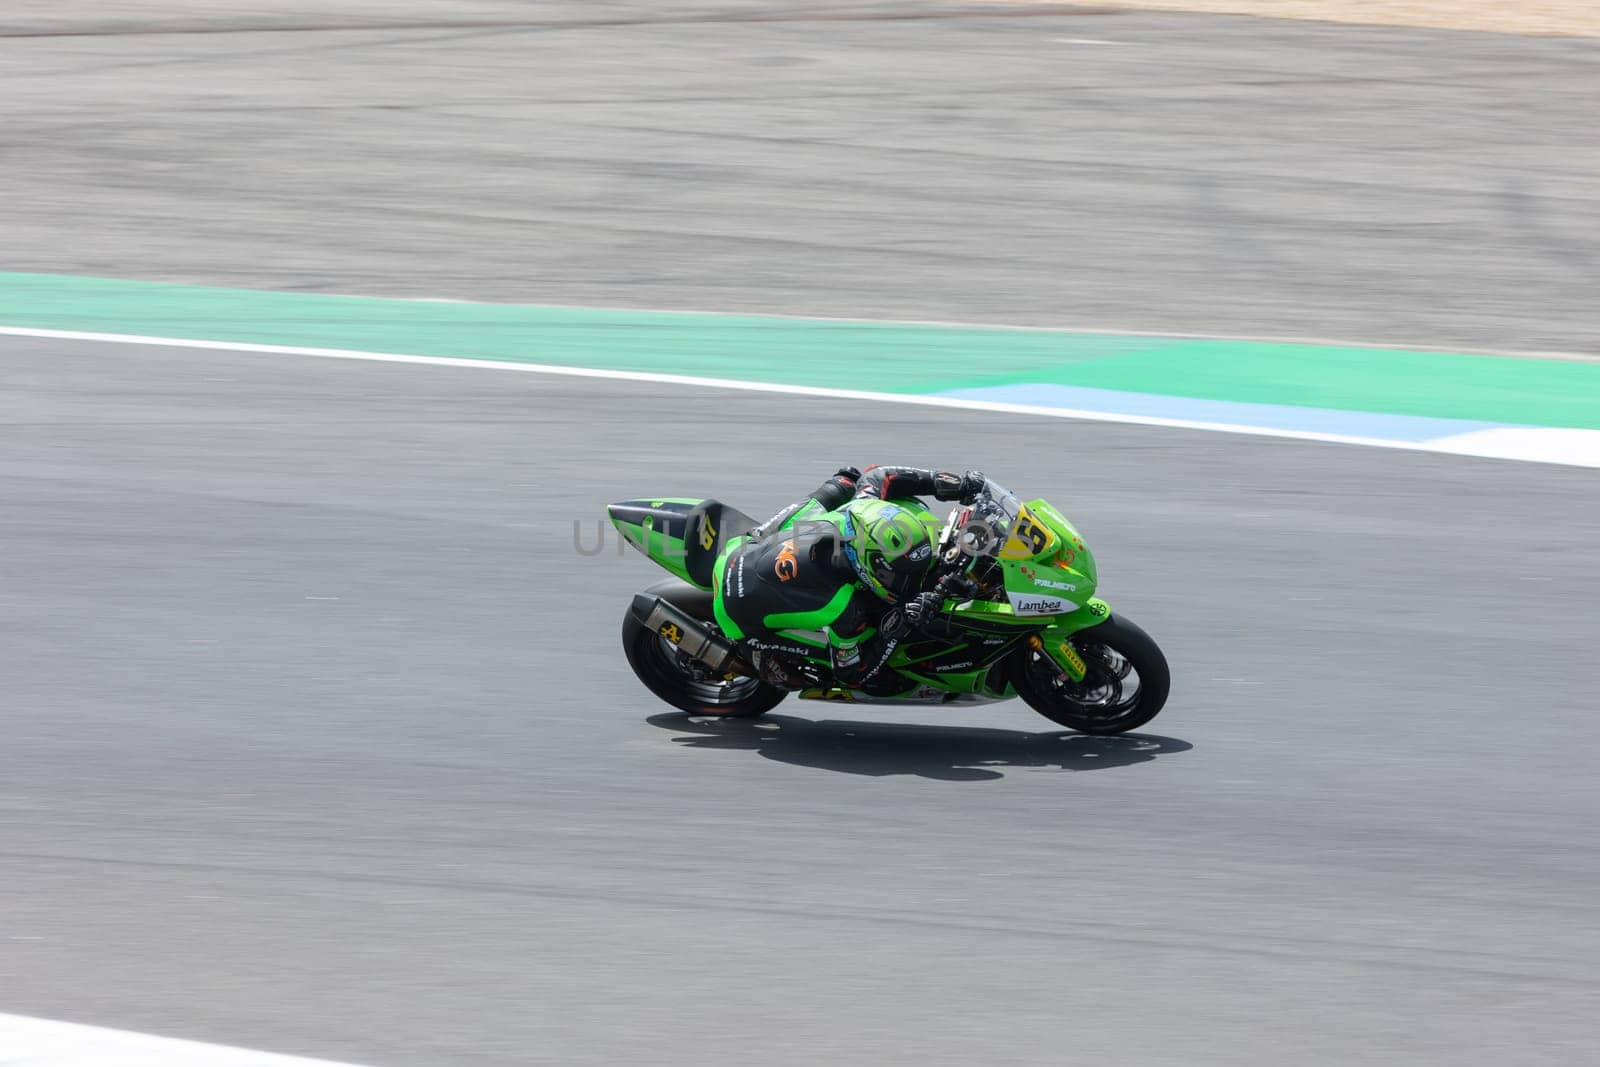 6 may 2023, Estoril, Portugal - MotoGP racing - A person riding a green motorcycle on a race track